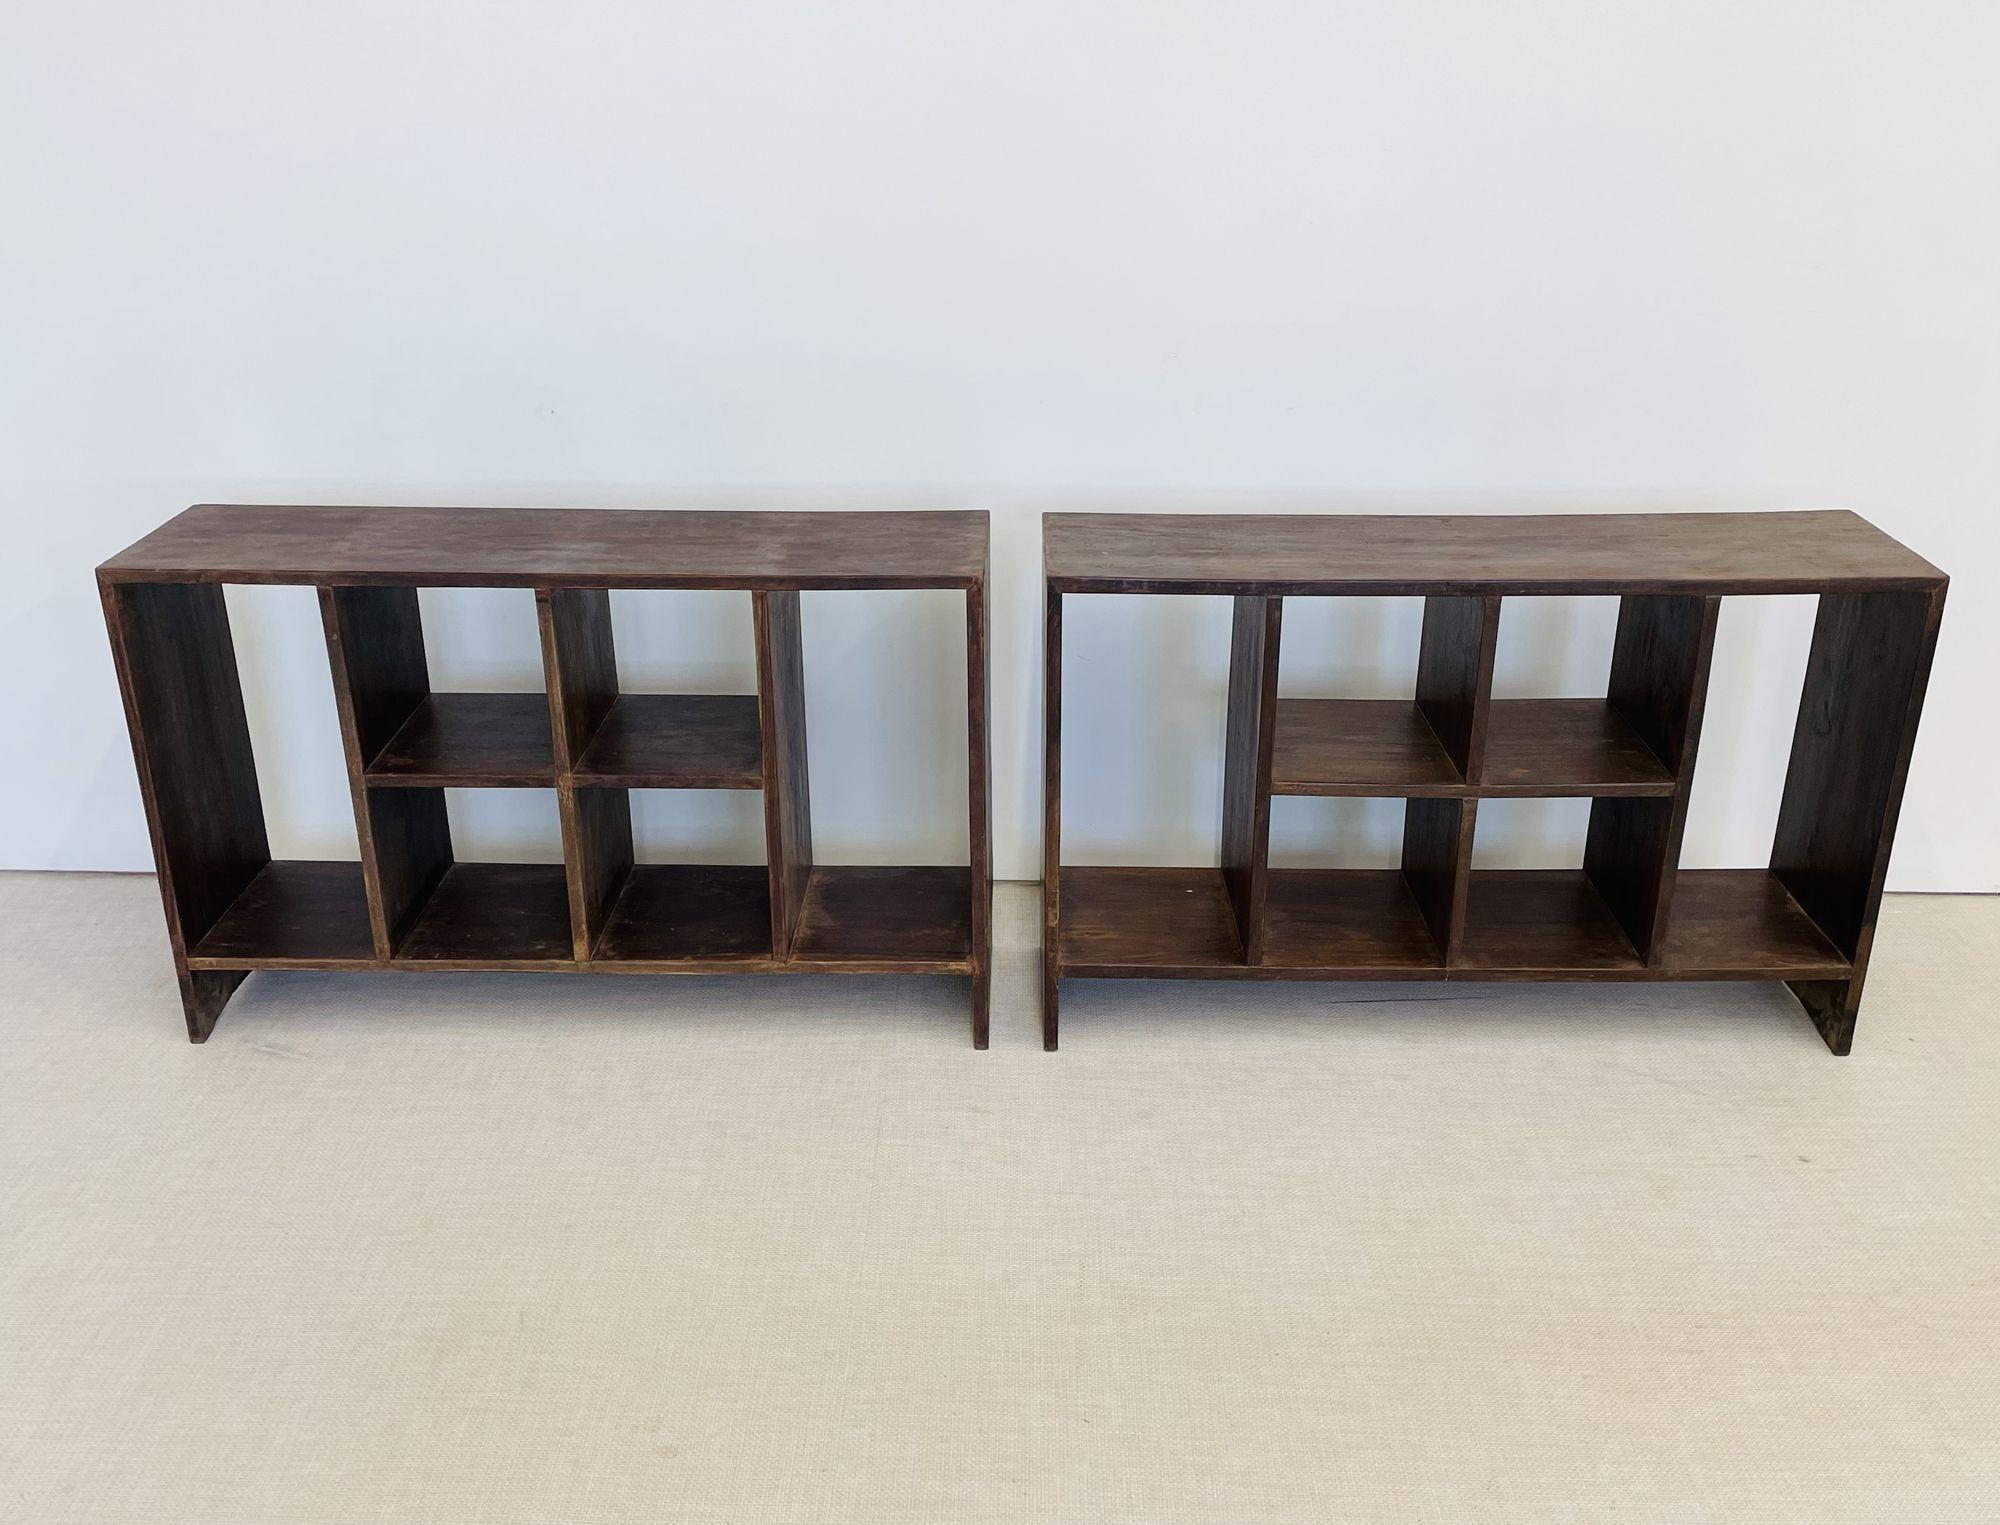 20th Century Pair of Authentic Pierre Jeanneret Bookcases / Shelving Unit, Mid-Century Modern